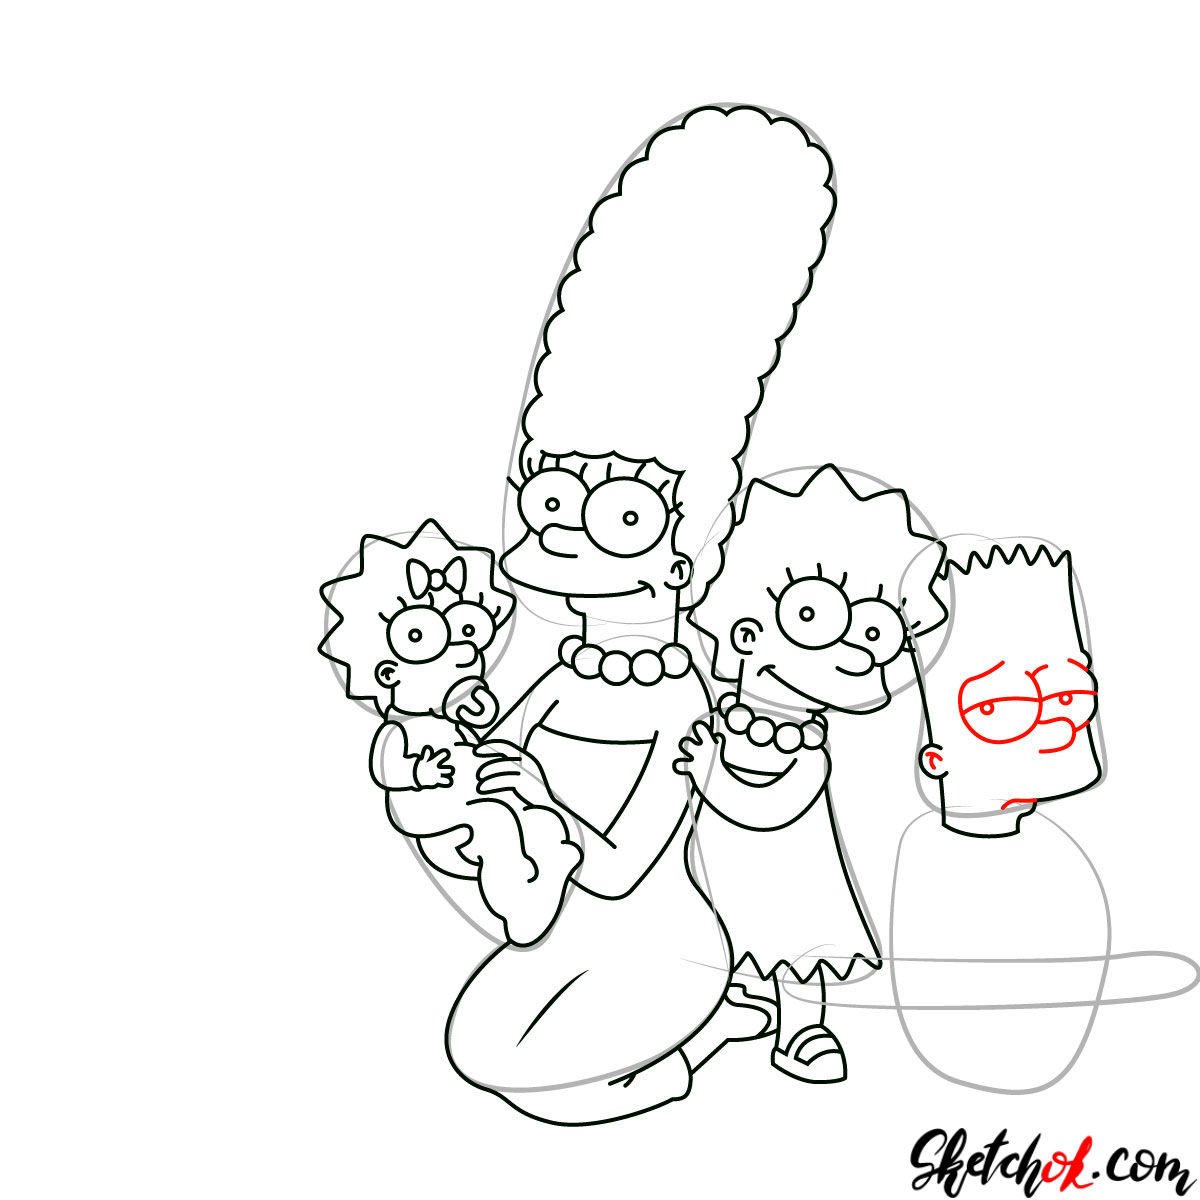 How to draw the Simpsons Family - step 17